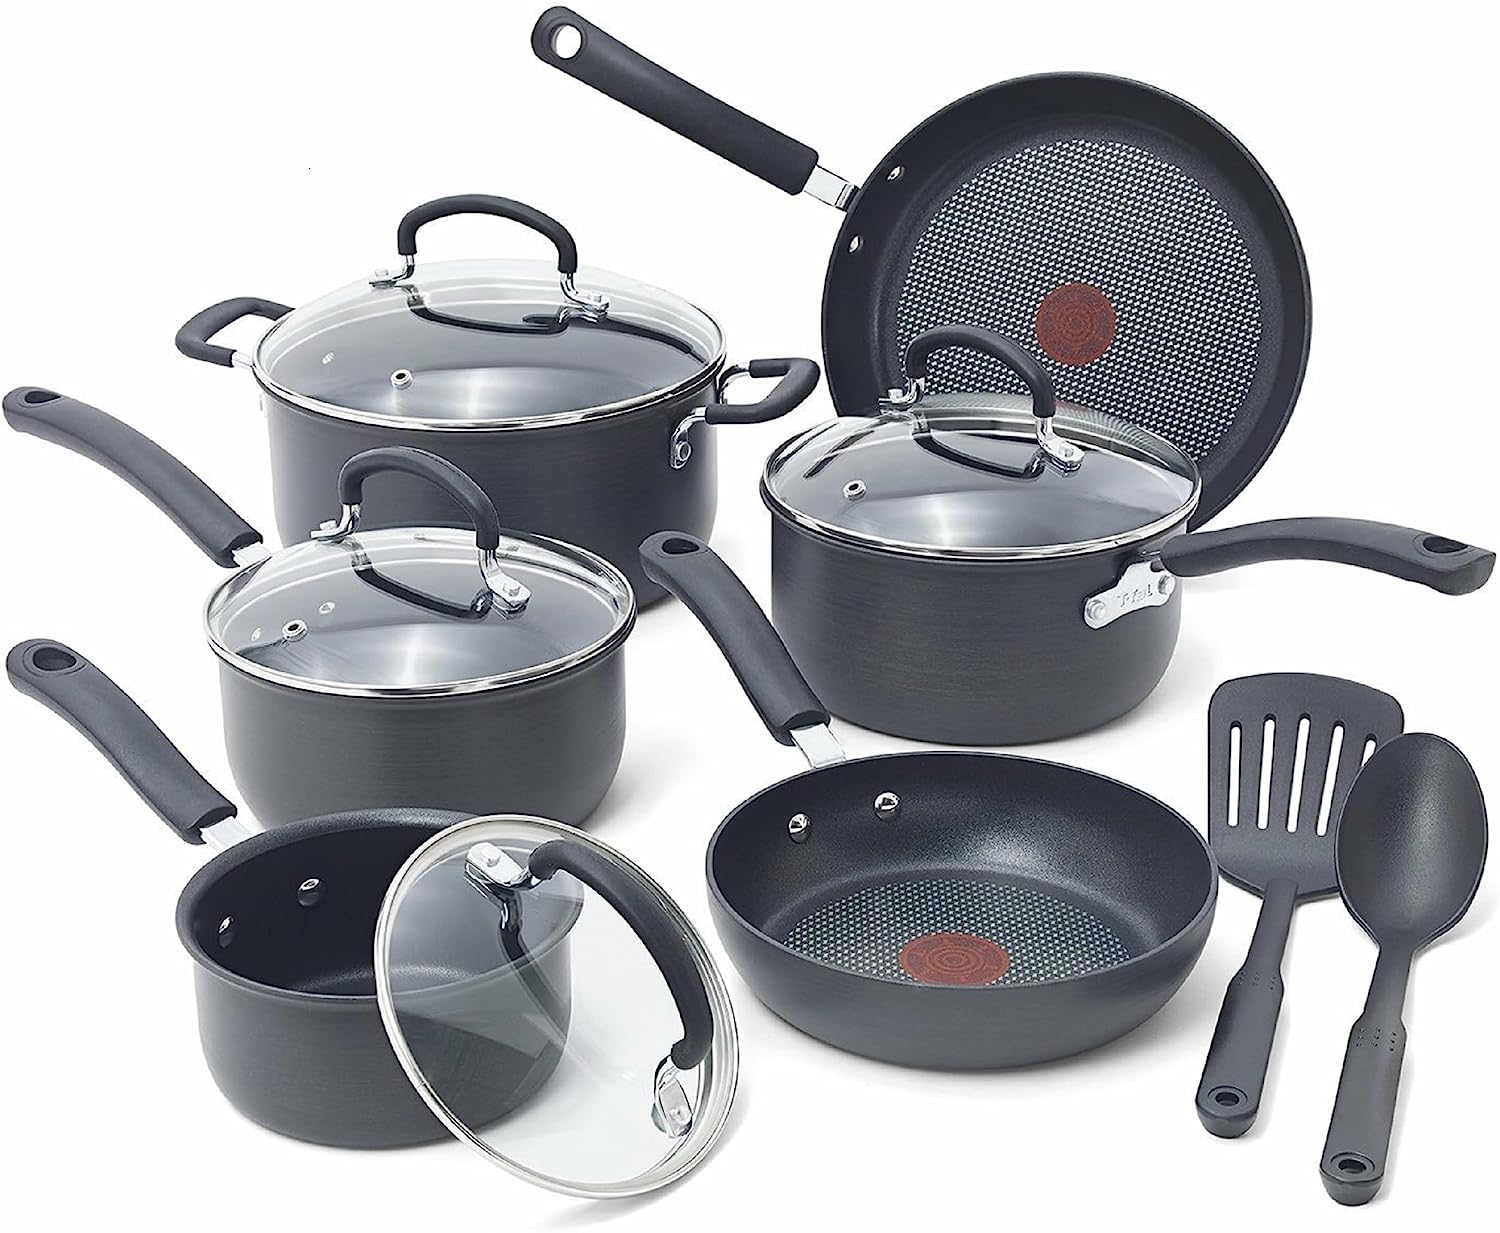 T-fal Ultimate Hard Anodized Nonstick